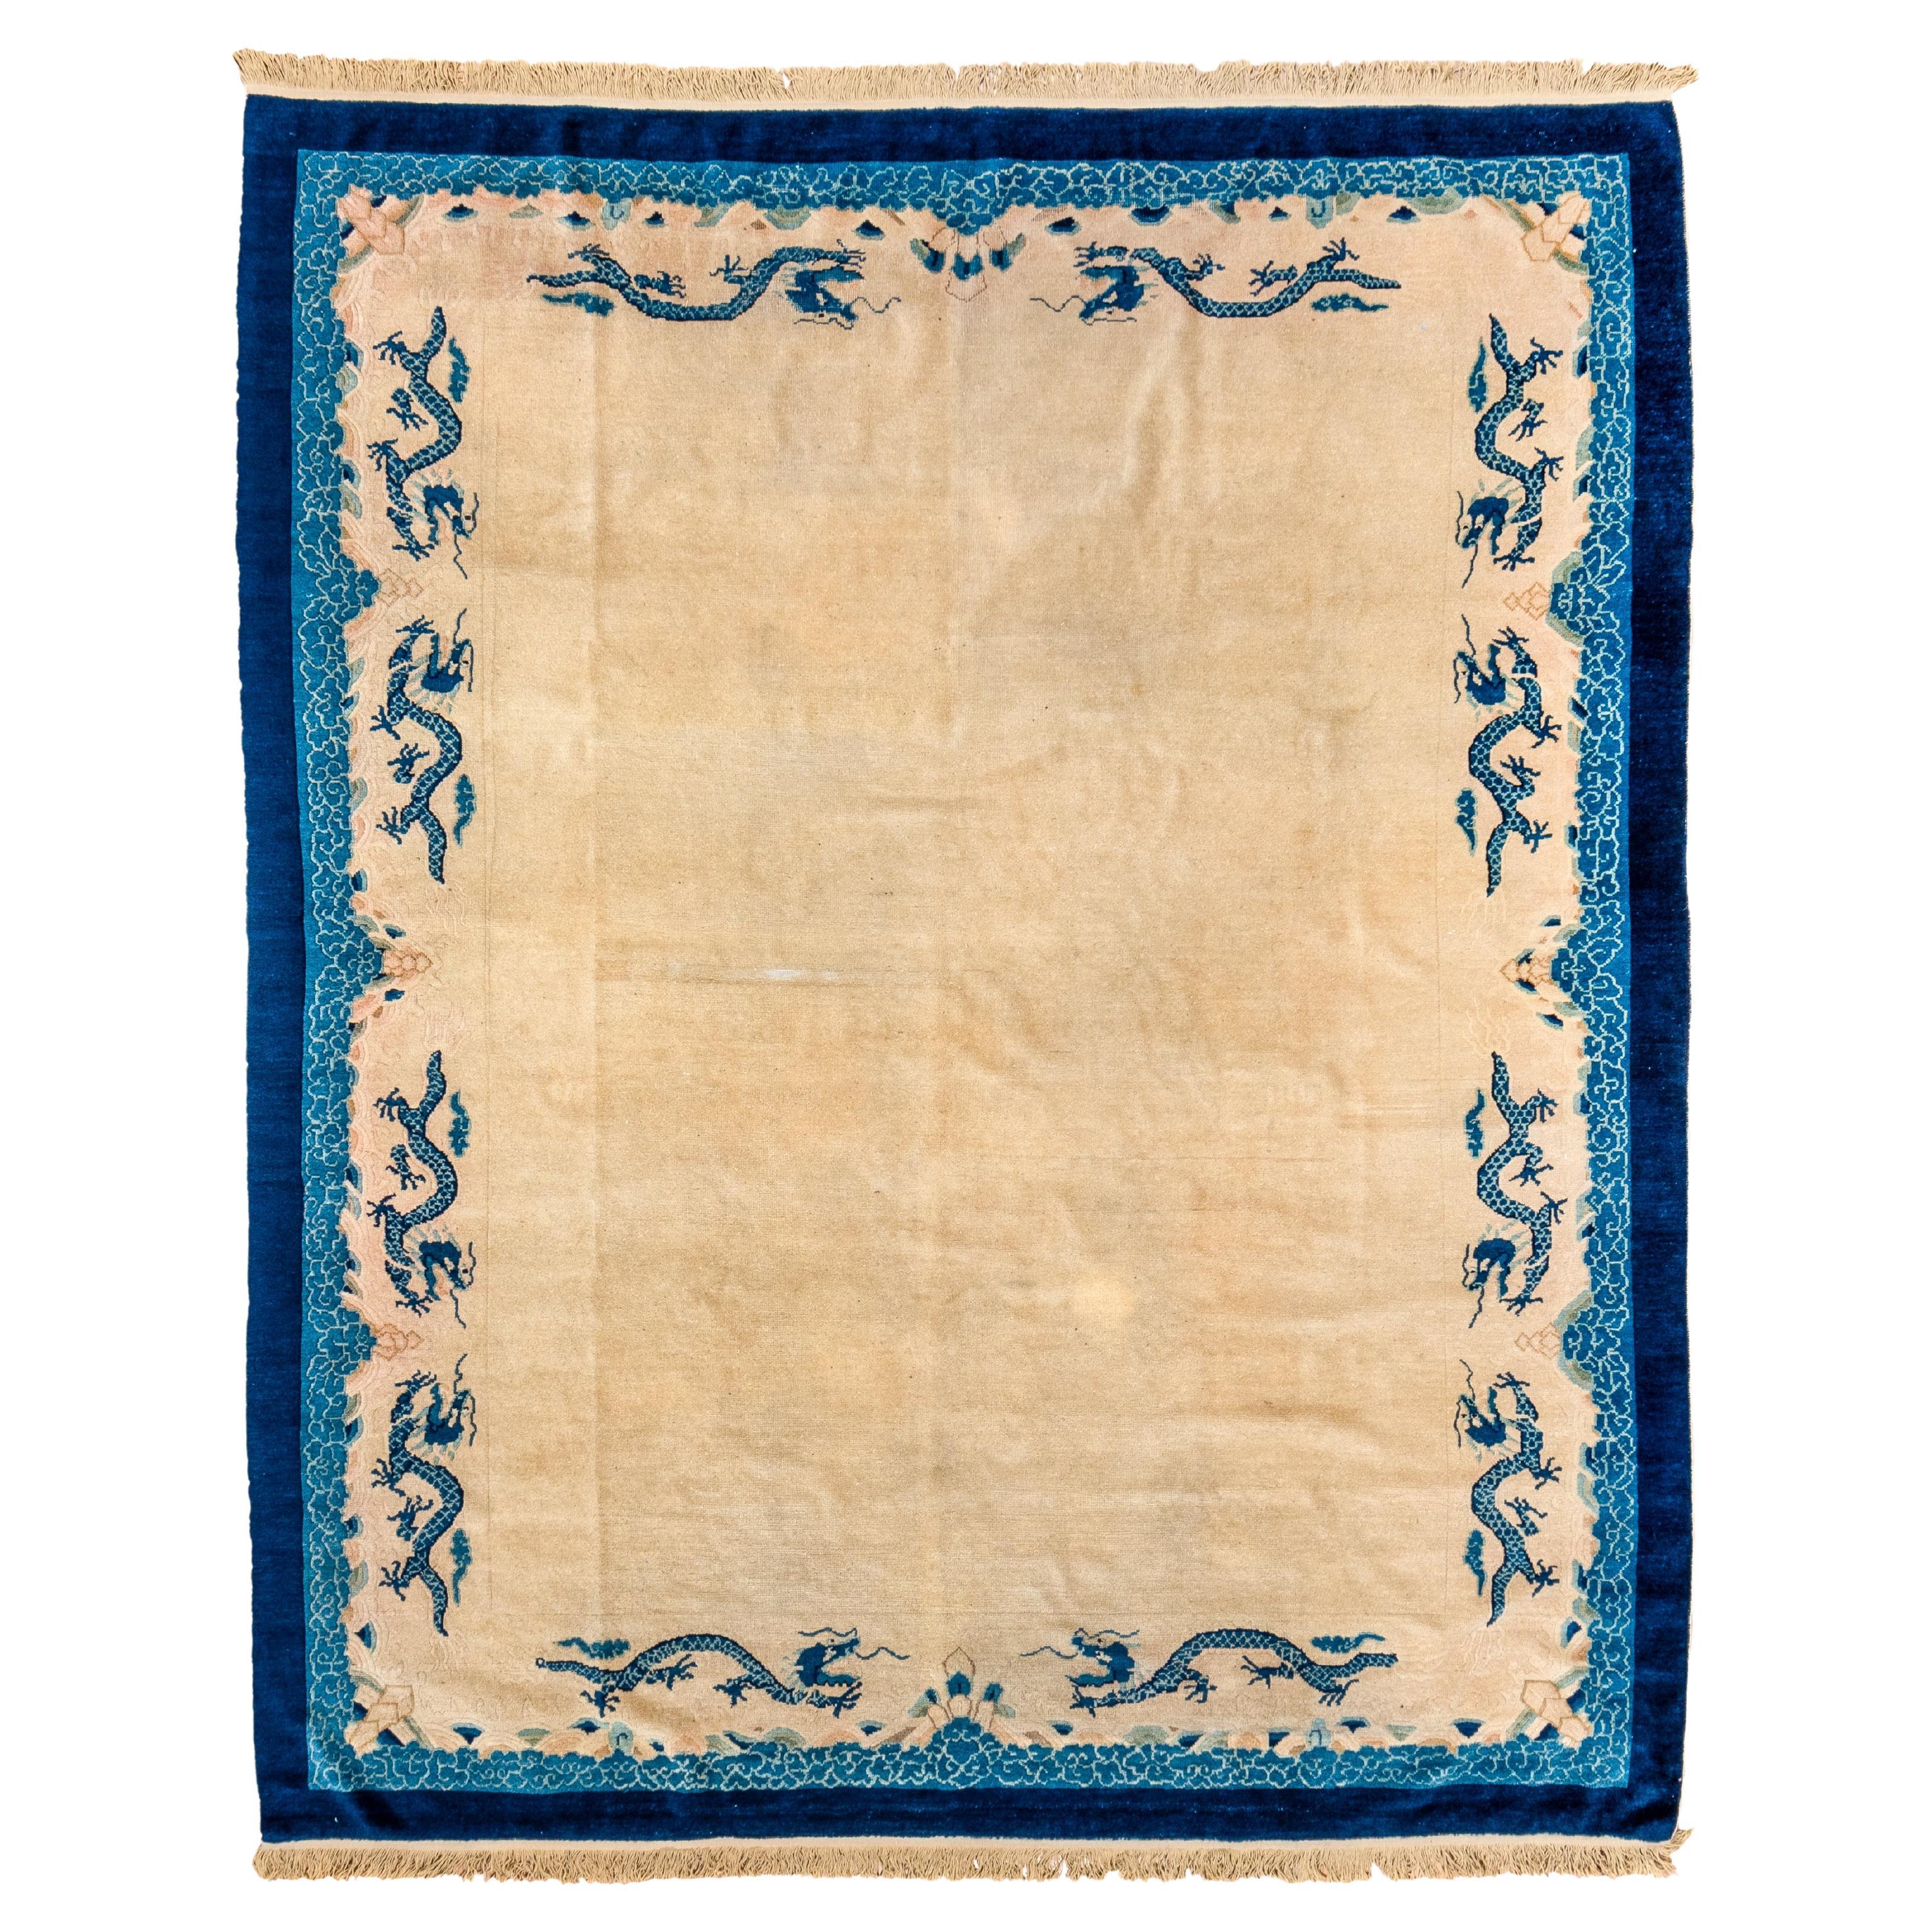 Antique Chinese Rug with a Straw Field, Blue Border and Blue Dragons